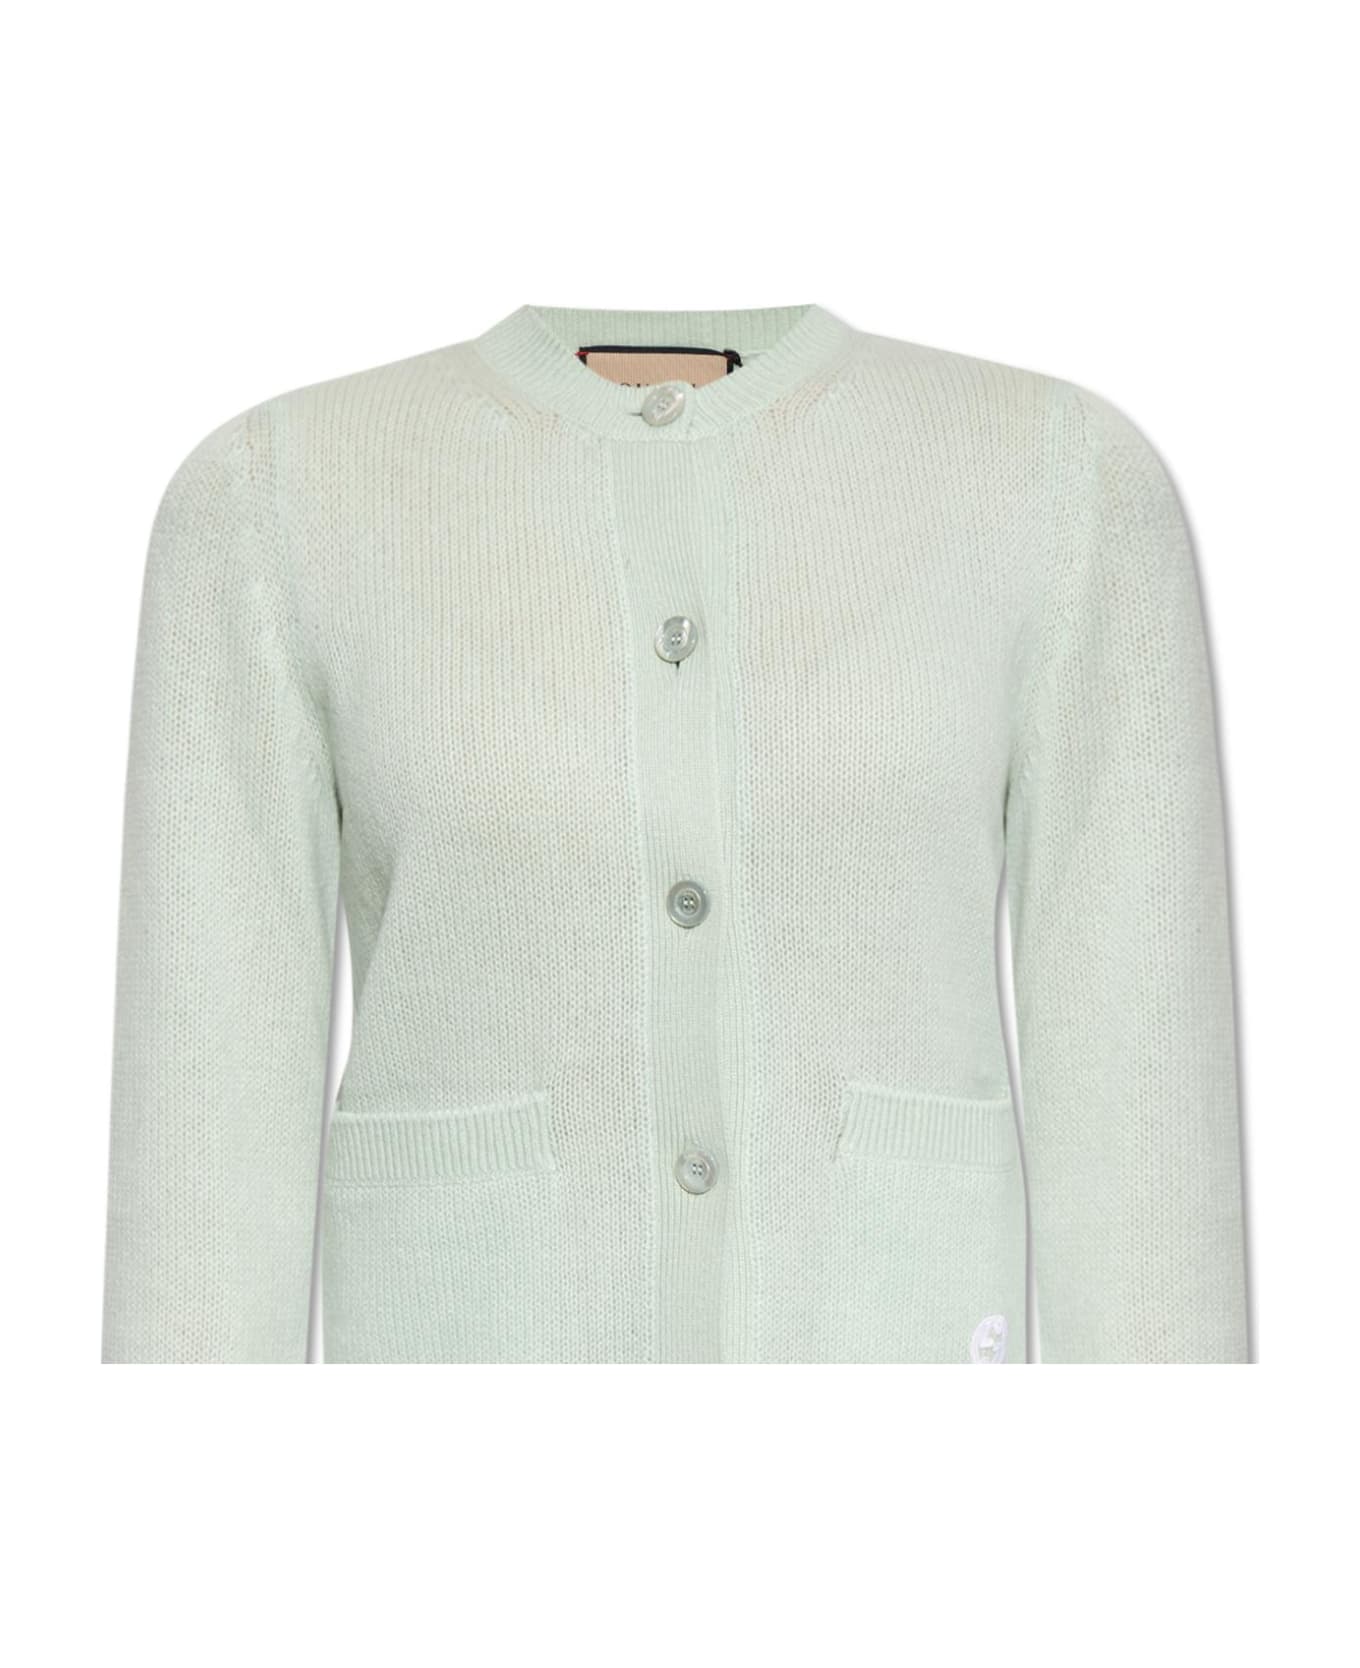 Gucci Buttoned Cardigan - Pale Mint